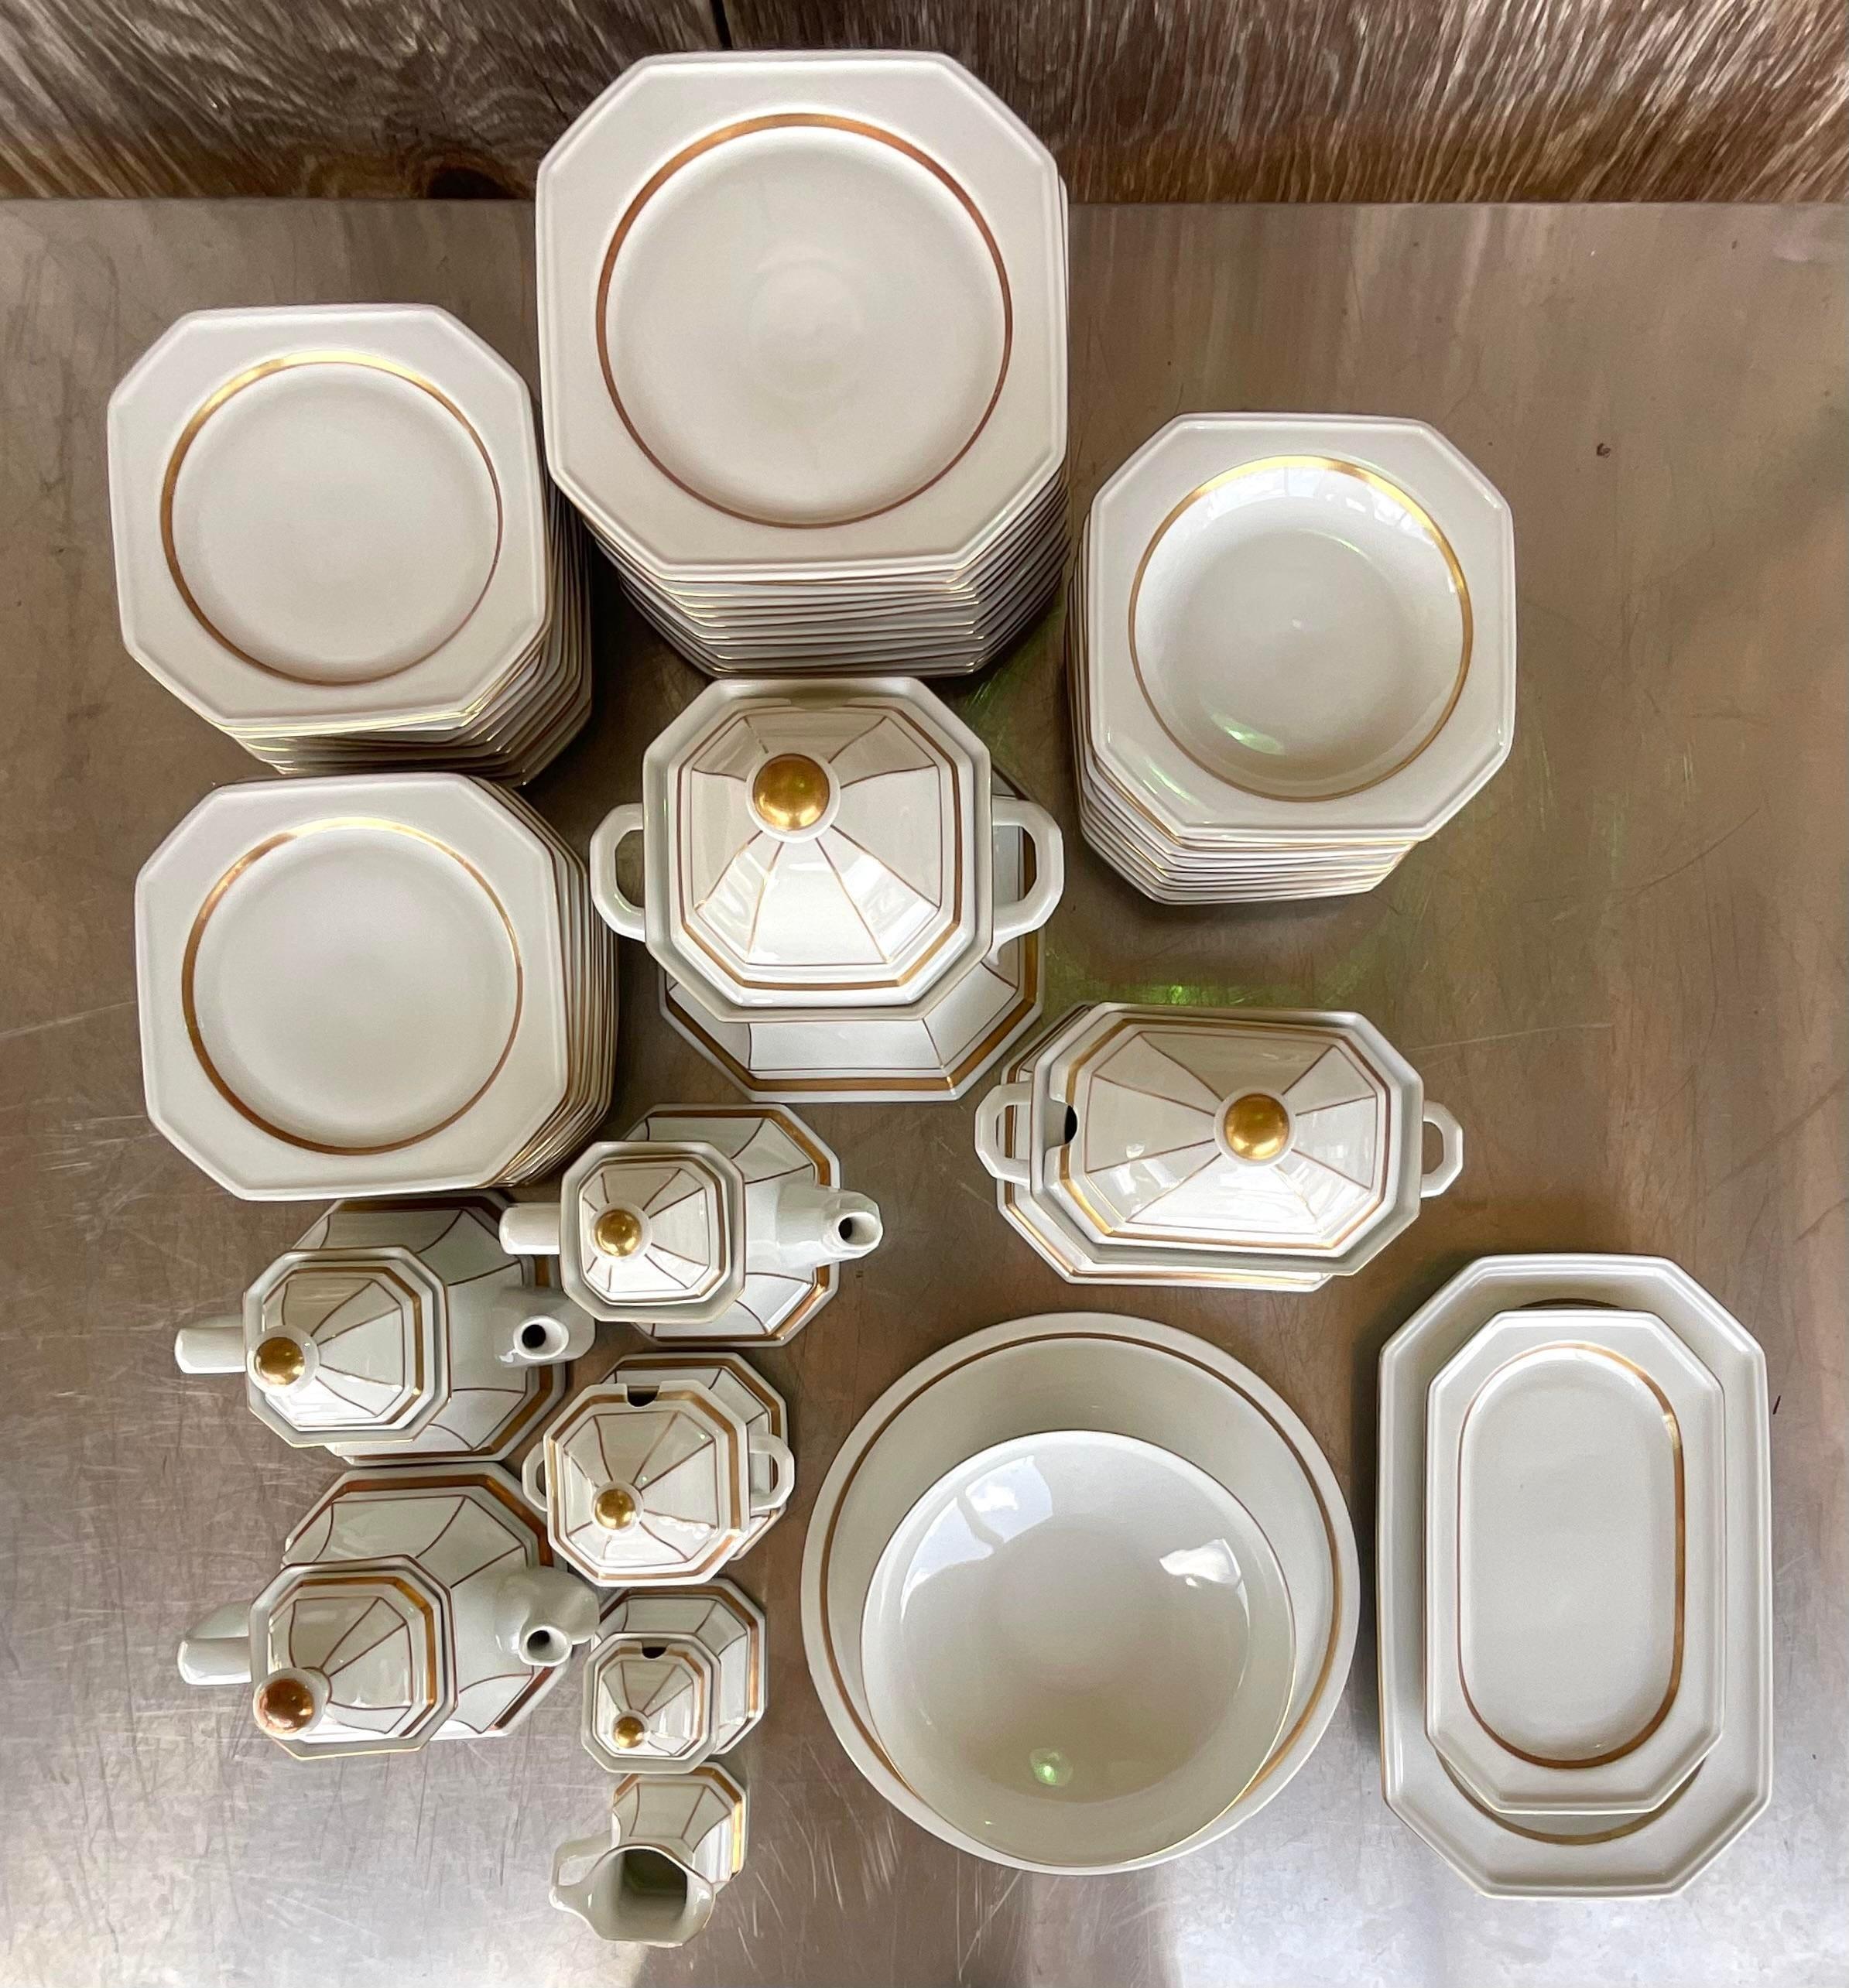 A fantastic vintage Boho set of Dinnerware. Made by the Gallo group in Germany. The Gallerie De Porcelaine “Lombardi Medici” design with a clean background and gold tipping. Signed on the bottom. A service for 12. Acquired from a Palm Beach